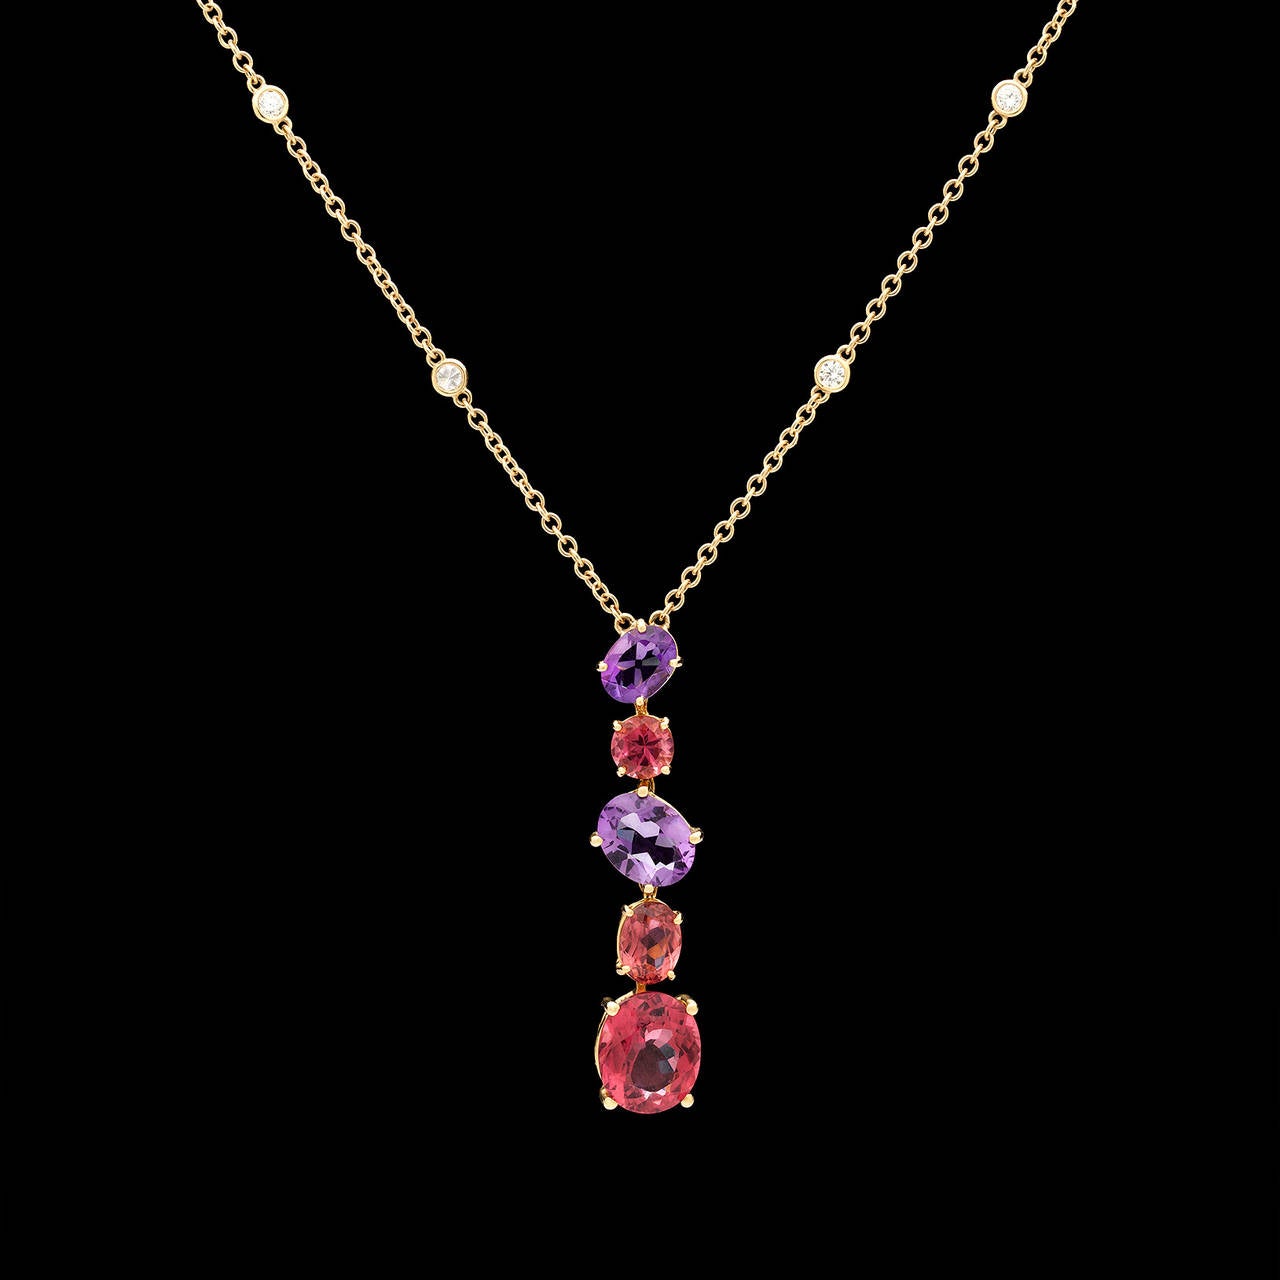 Contemporary Asprey Chaos Necklace Features a Five Stone Oval and Round Cut Multi Gem Pendant in Lovely Shades of Pink and Purple. The 1.19ct diamond adorned chain adjusts down from 17 inches to 15 inches in half size intervals. The necklace weighs